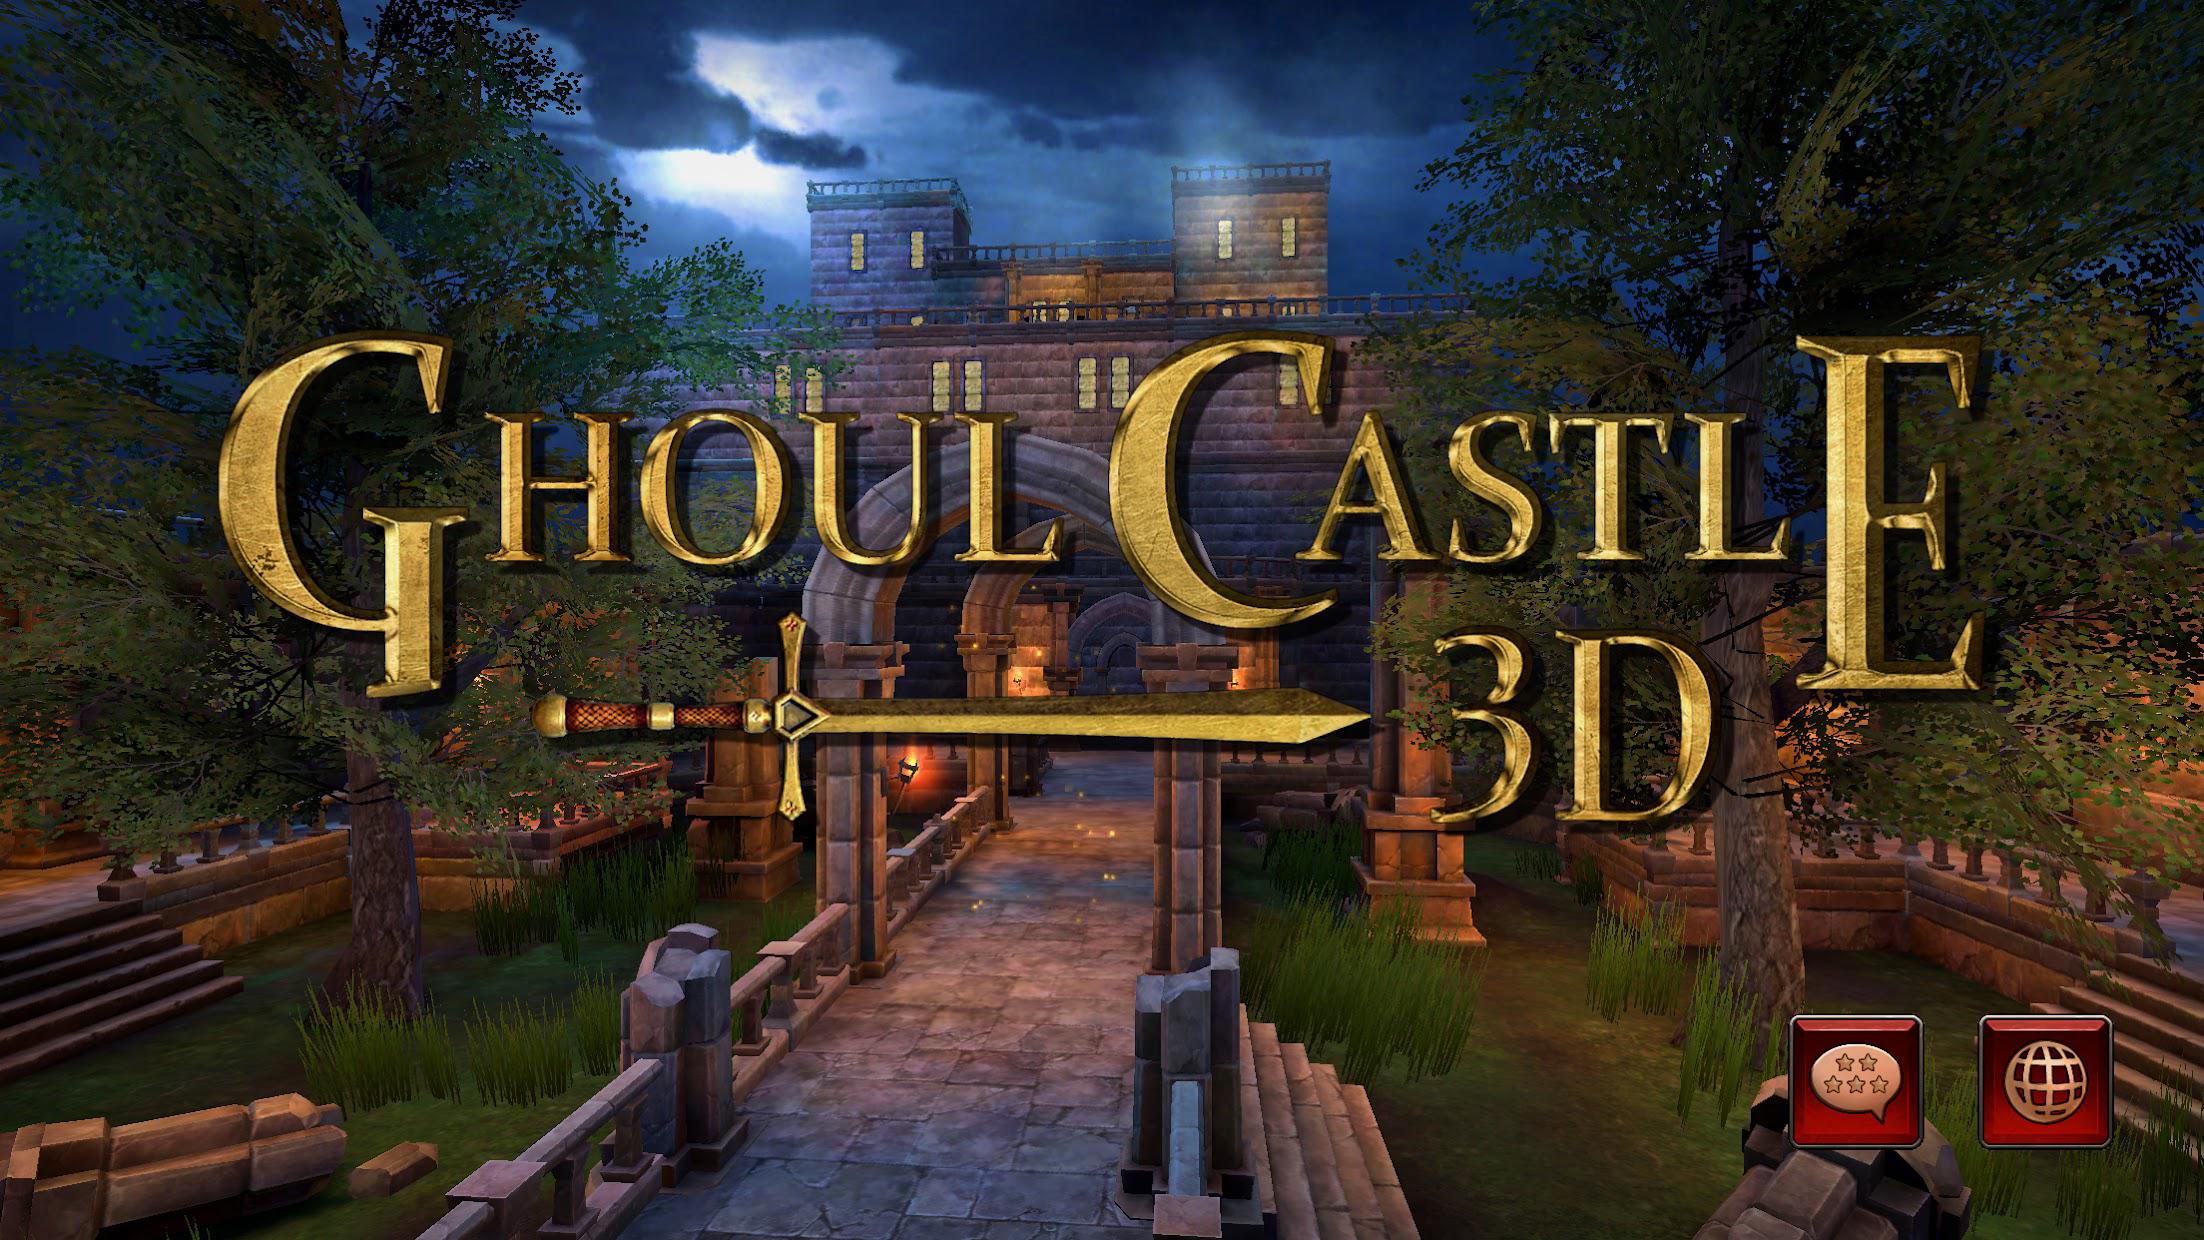 Ghoul Castle 3D - Action RPG Dungeon Crawler_截图_2